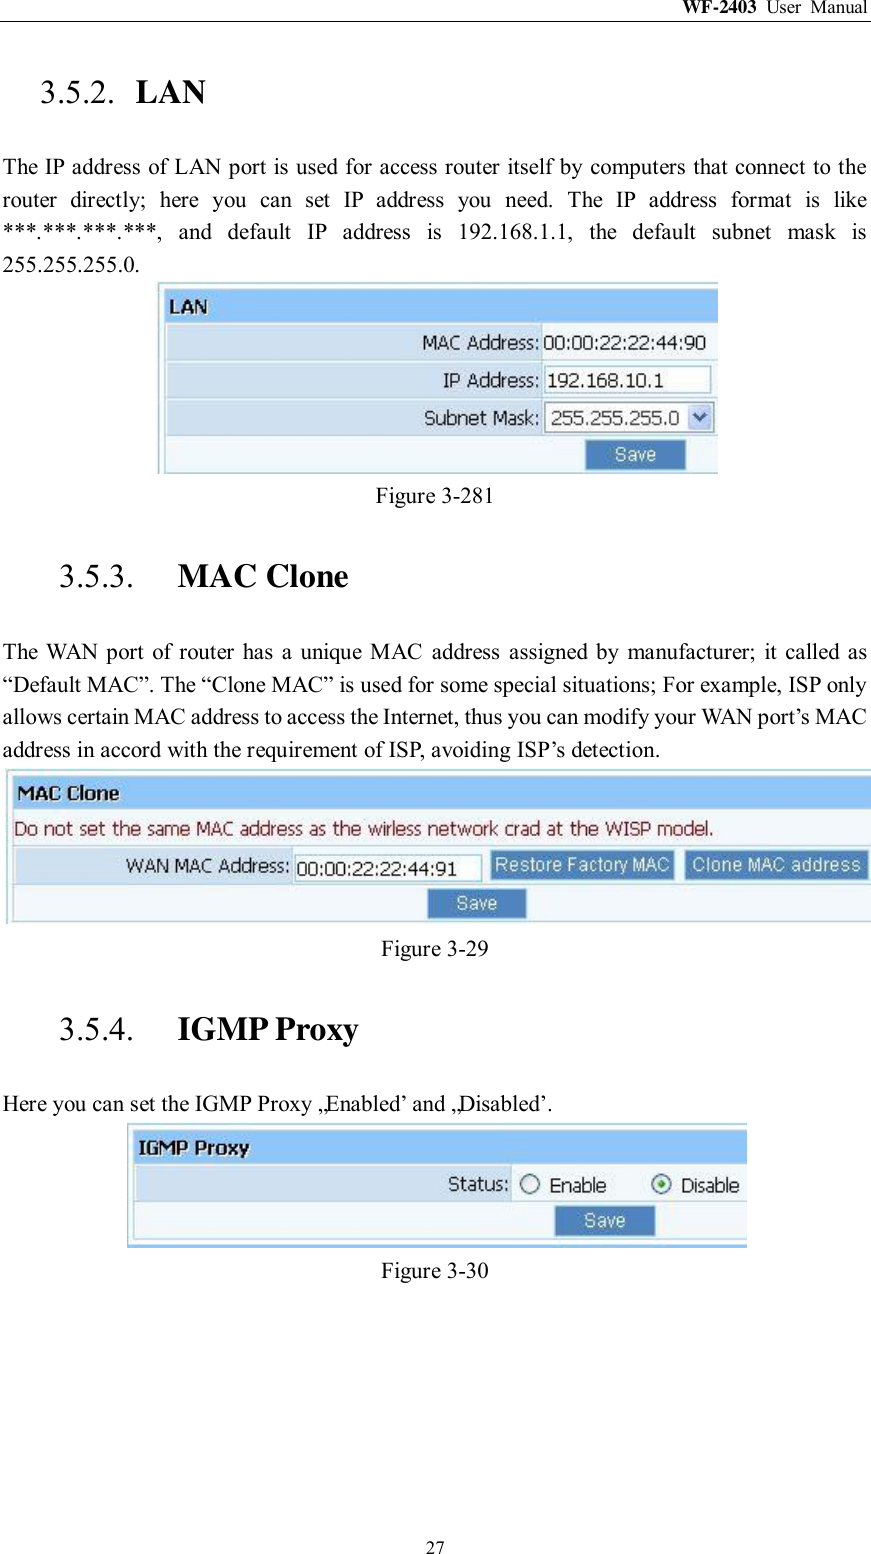 WF-2403  User  Manual  27 3.5.2. LAN The IP address of LAN port is used for access router itself by computers that connect to the router  directly;  here  you  can  set  IP  address  you  need.  The  IP  address  format  is  like ***.***.***.***,  and  default  IP  address  is  192.168.1.1,  the  default  subnet  mask  is 255.255.255.0.  Figure 3-281 3.5.3. MAC Clone The  WAN port  of router  has  a  unique  MAC  address  assigned  by  manufacturer;  it  called as “Default MAC”. The “Clone MAC” is used for some special situations; For example, ISP only allows certain MAC address to access the Internet, thus you can modify your WAN port‟s MAC address in accord with the requirement of ISP, avoiding ISP‟s detection.  Figure 3-29 3.5.4. IGMP Proxy Here you can set the IGMP Proxy „Enabled‟ and „Disabled‟.  Figure 3-30 